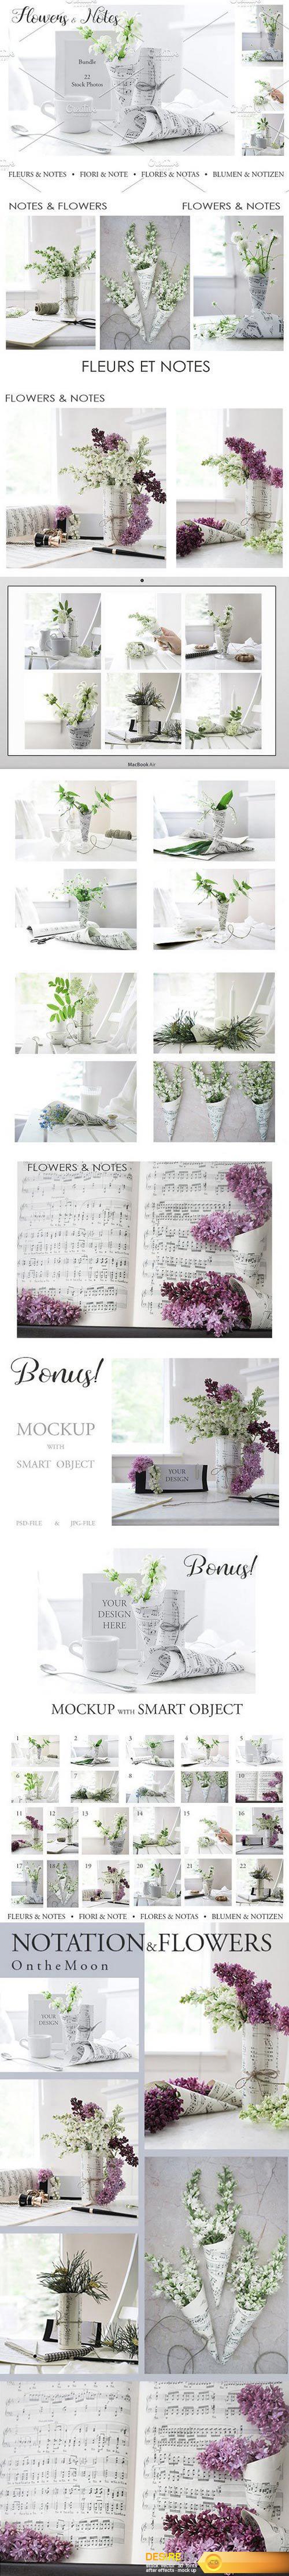 CM - NOTATION. FLOWERS & NOTES 1573411